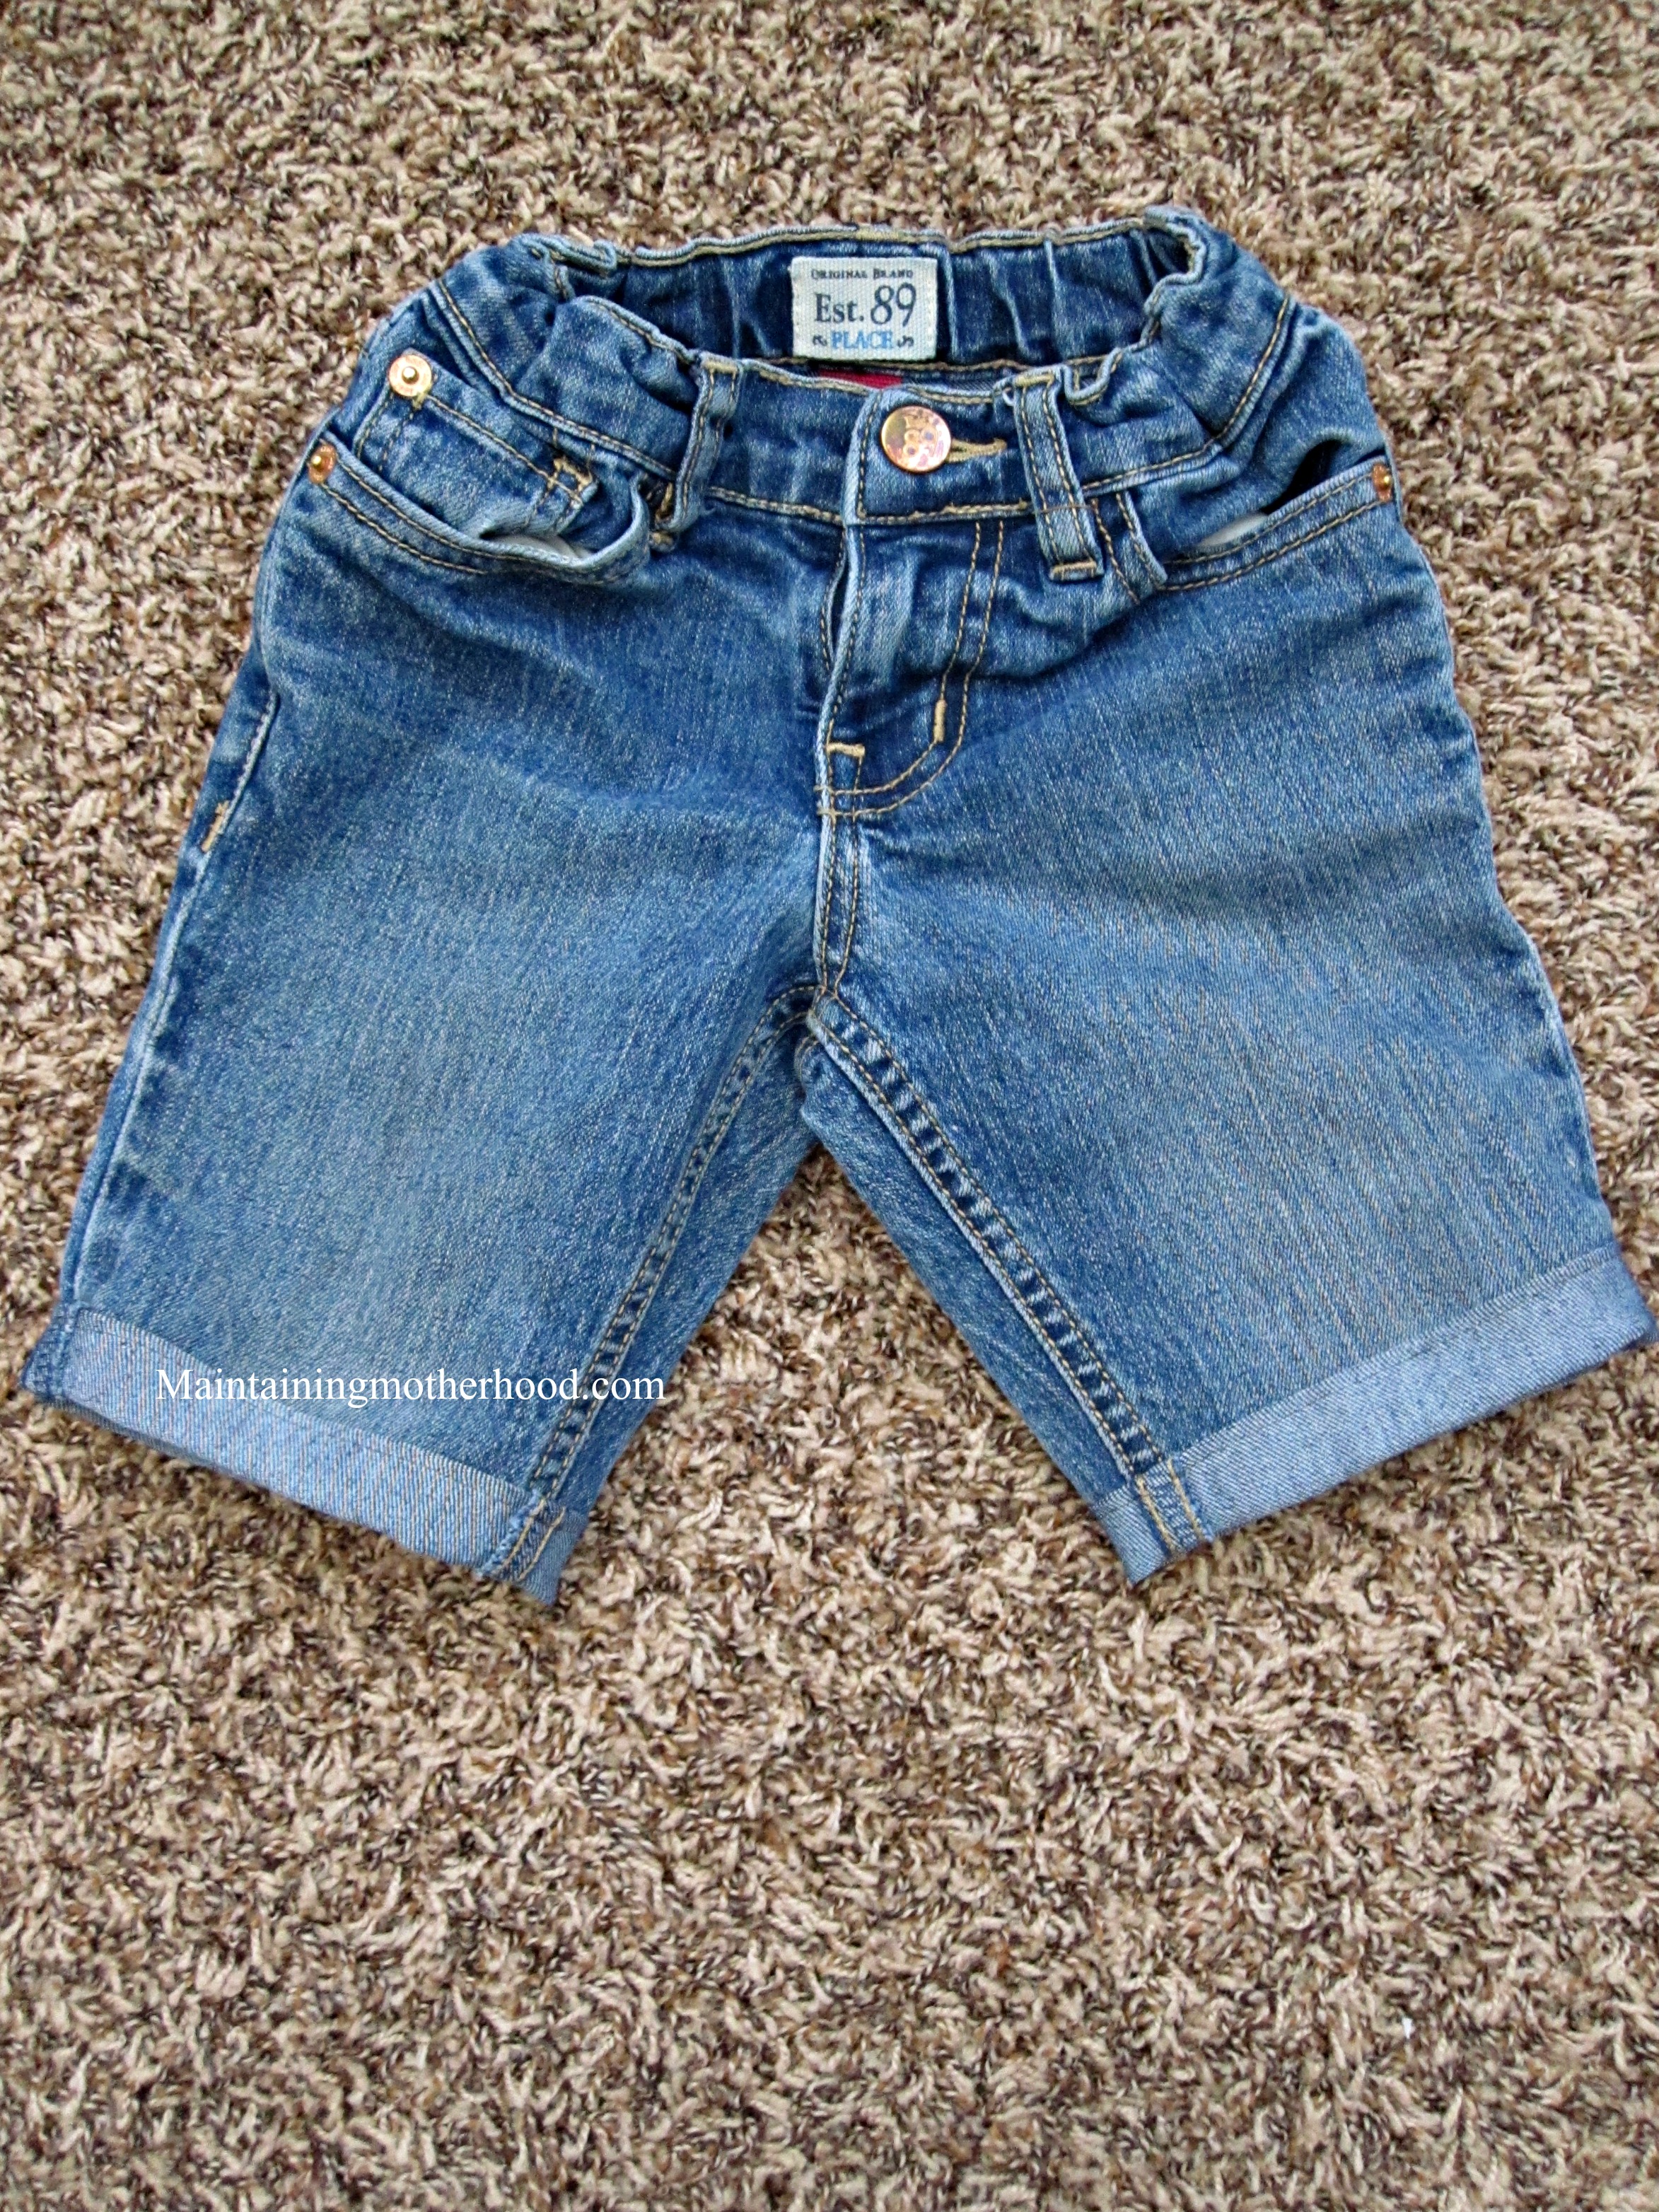 Looking for some comfortable and durable jean shorts? Why not use your favorite jeans with the worn out knee for some great DIY denim shorts?